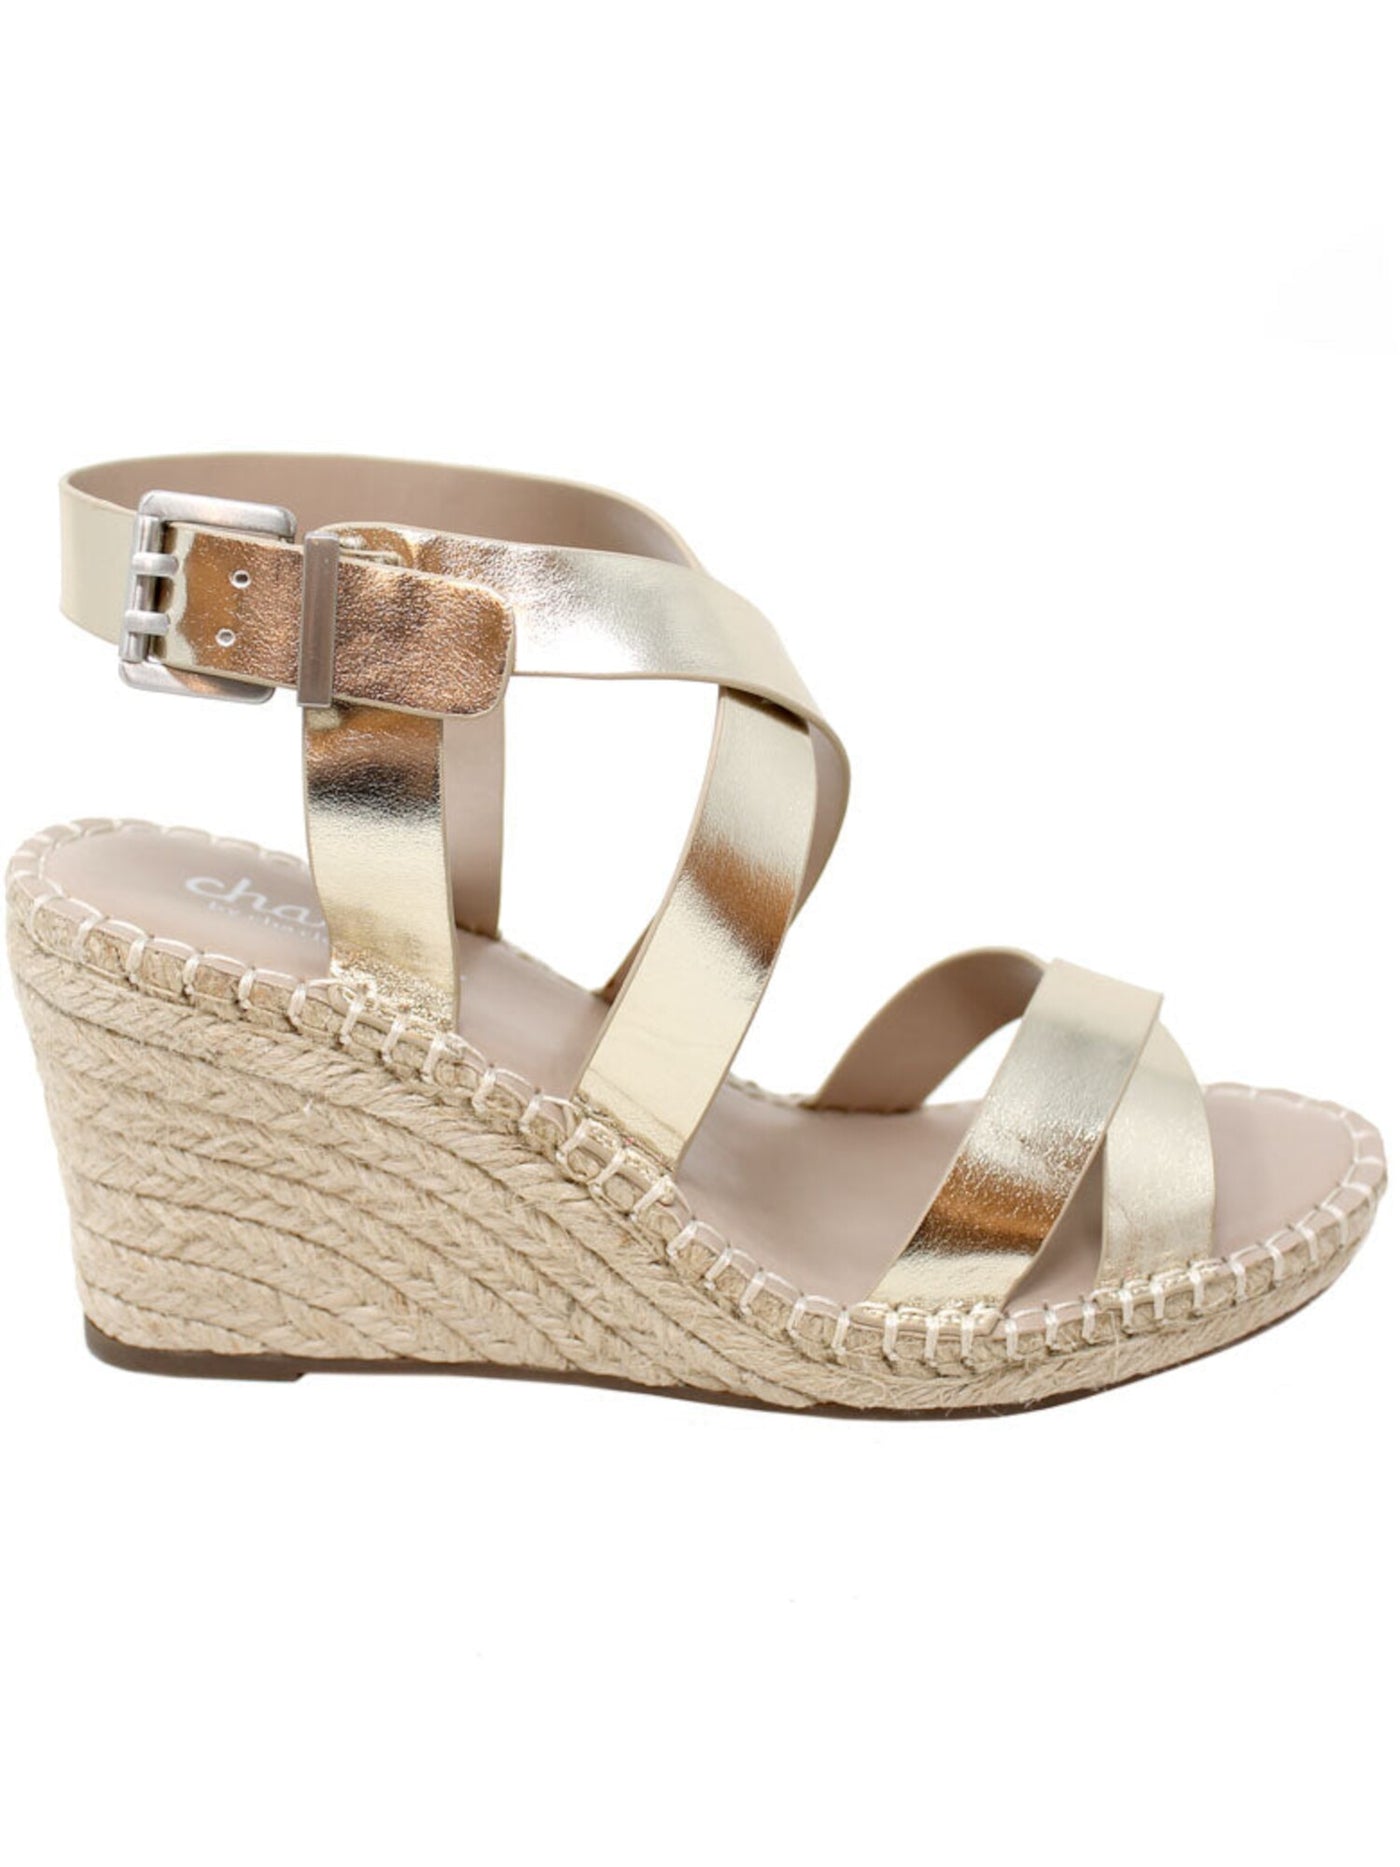 CHARLES BY CHARLES DAVID Womens Gold Metallic Padded Woven Jute Stretch Strappy Noteworthy Round Toe Wedge Buckle Espadrille Shoes M